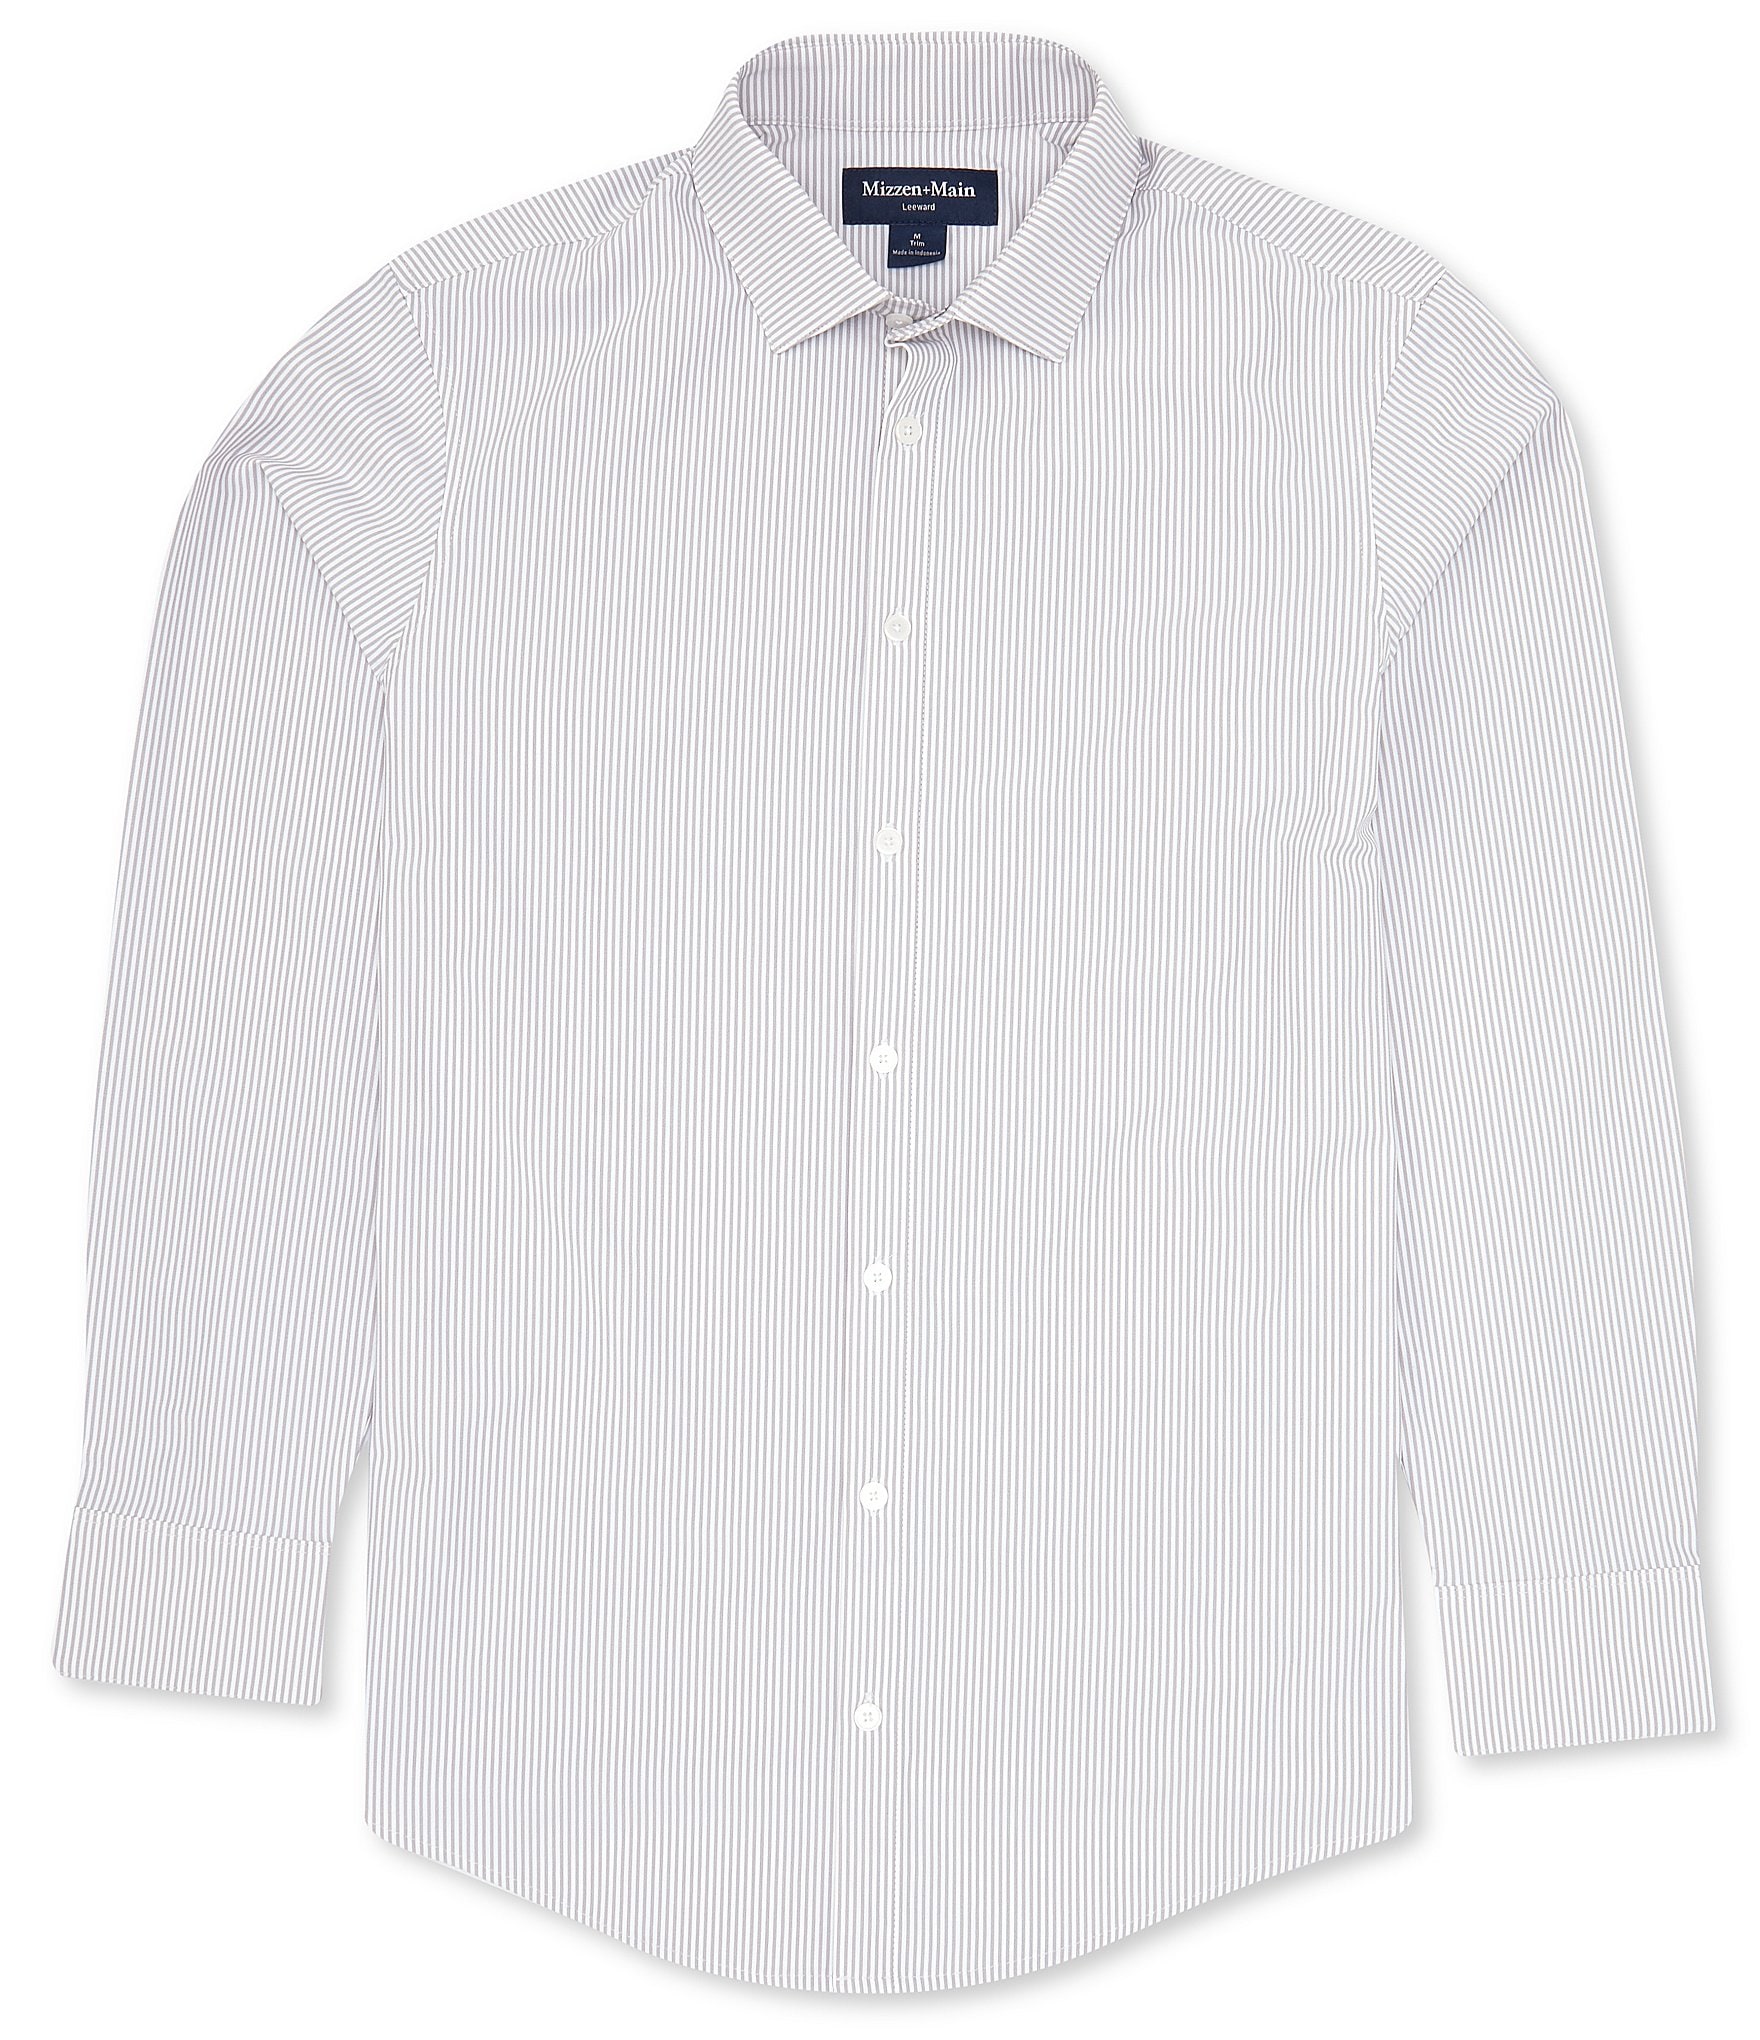 Grey Men's Casual Button-Up Shirts